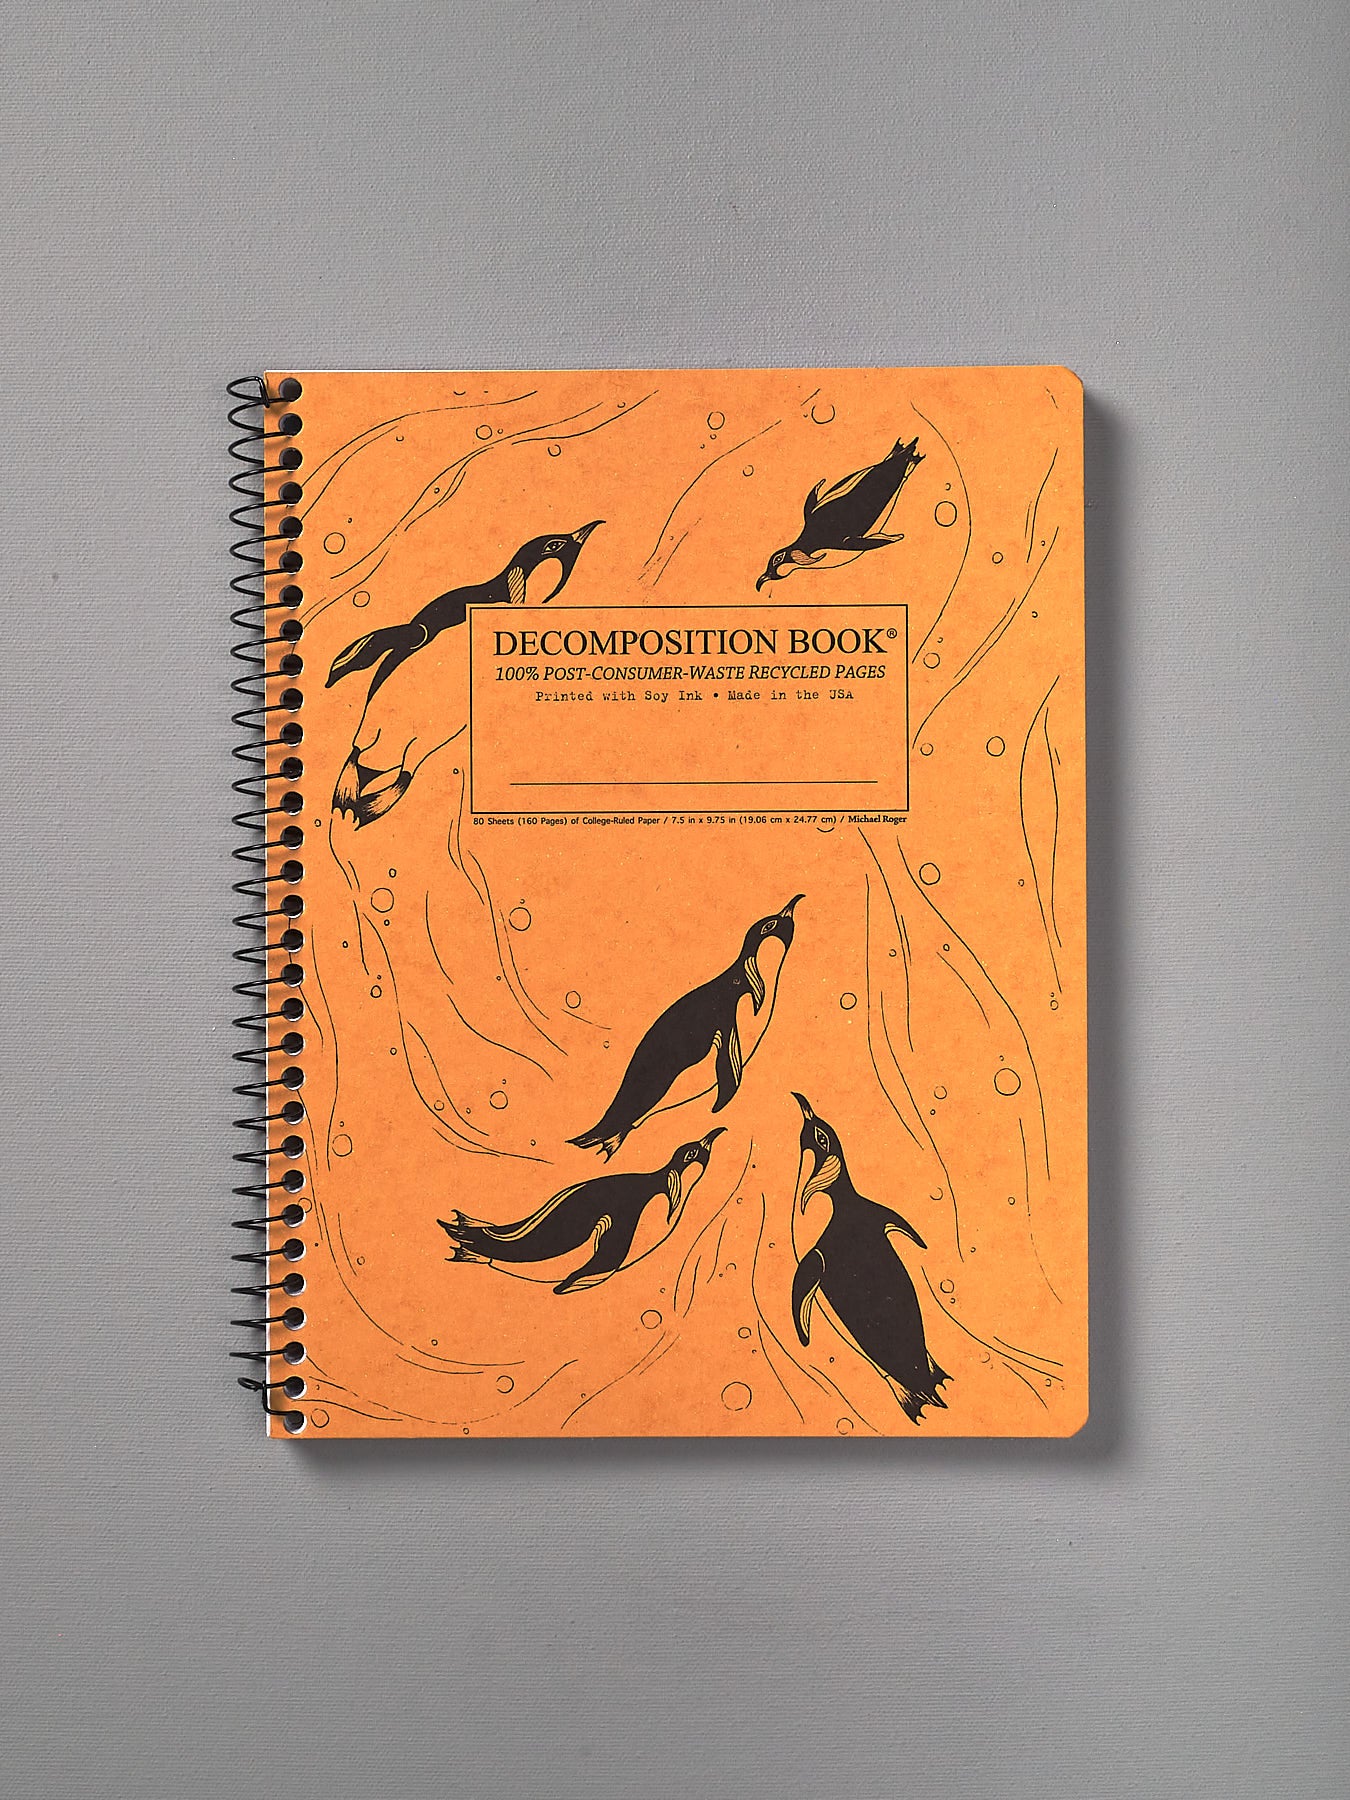 A Decomposition Recycled Notebook – Large/Ruled (King Penguins) with penguins on it.